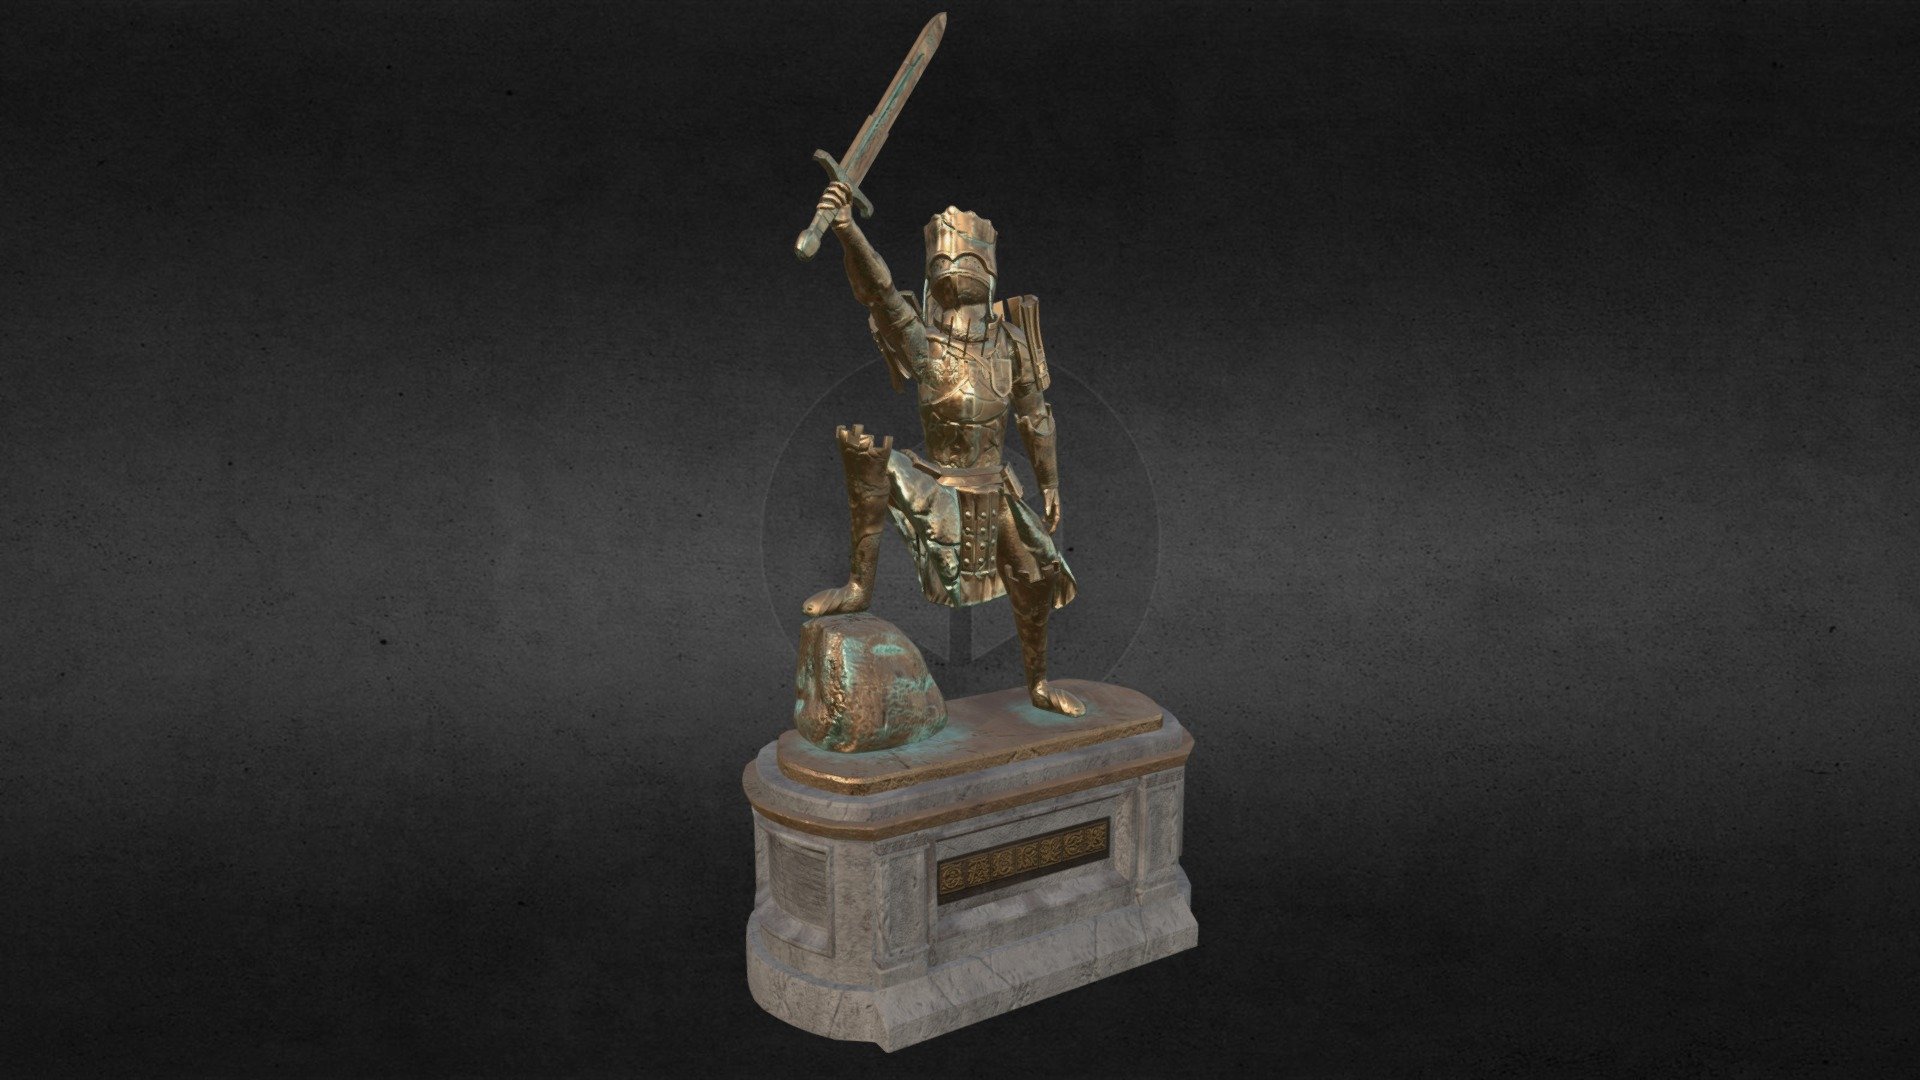 Centerpiece for my new Environment Piece, which can be found on my Artstation here: https://www.artstation.com/thirstynerd

I made this statue following a pretty traditional workflow for modelling a character, in case I wanted to texture it normally as a character model. I modelled Gabriel in Zbrush and retopologized him in 3ds max, gave him a basic biped rig to pose him with and then Textured him in Substance Painter 3d model